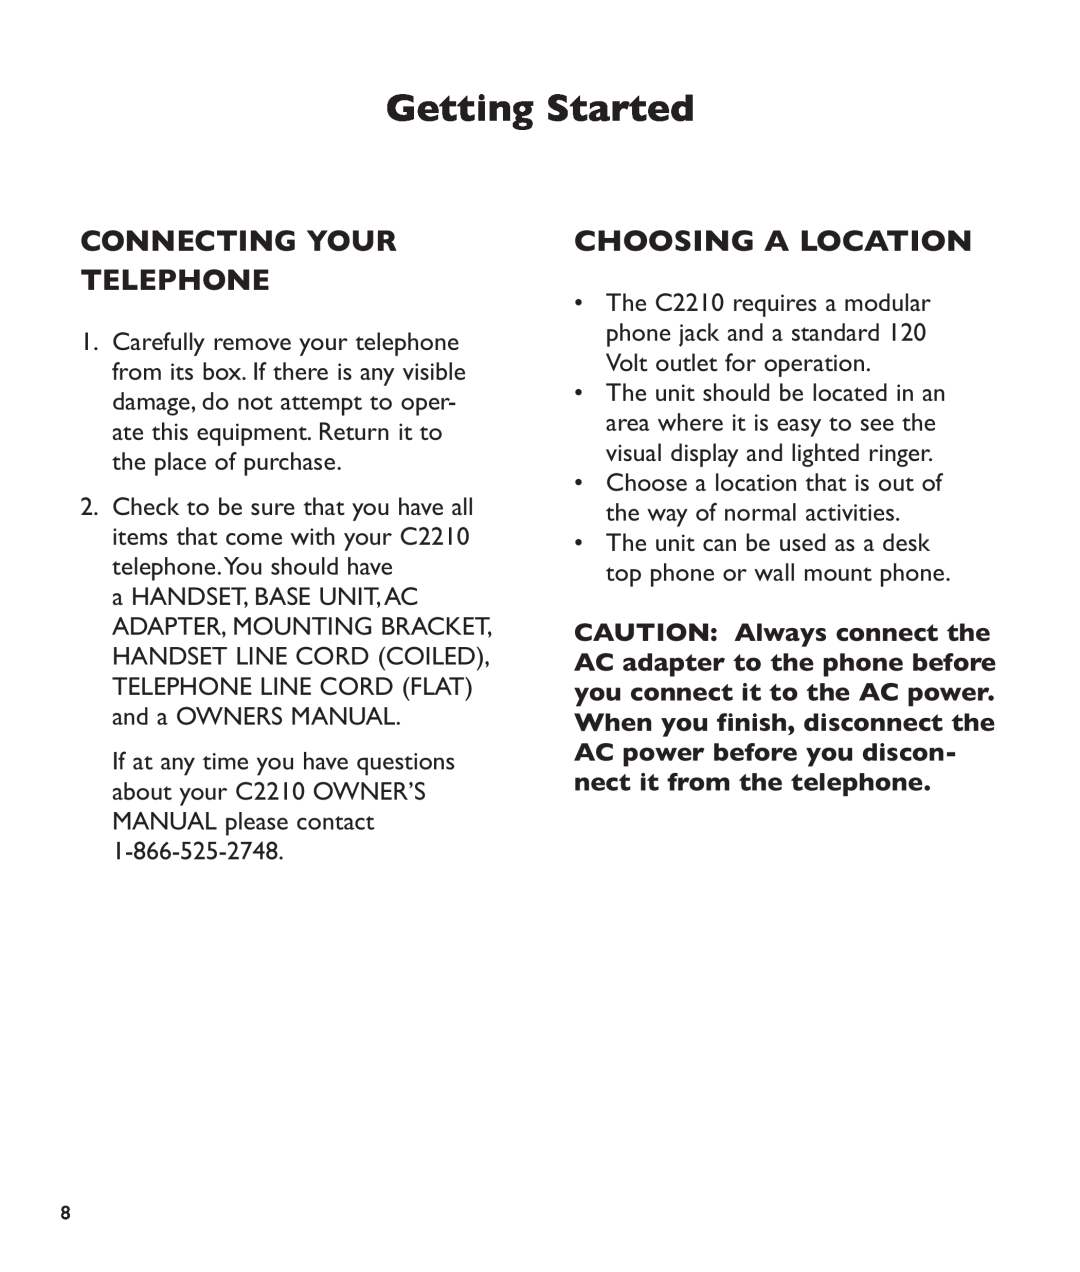 Clarity c2210 manual Connecting Your Telephone, Choosing A Location, Getting Started 